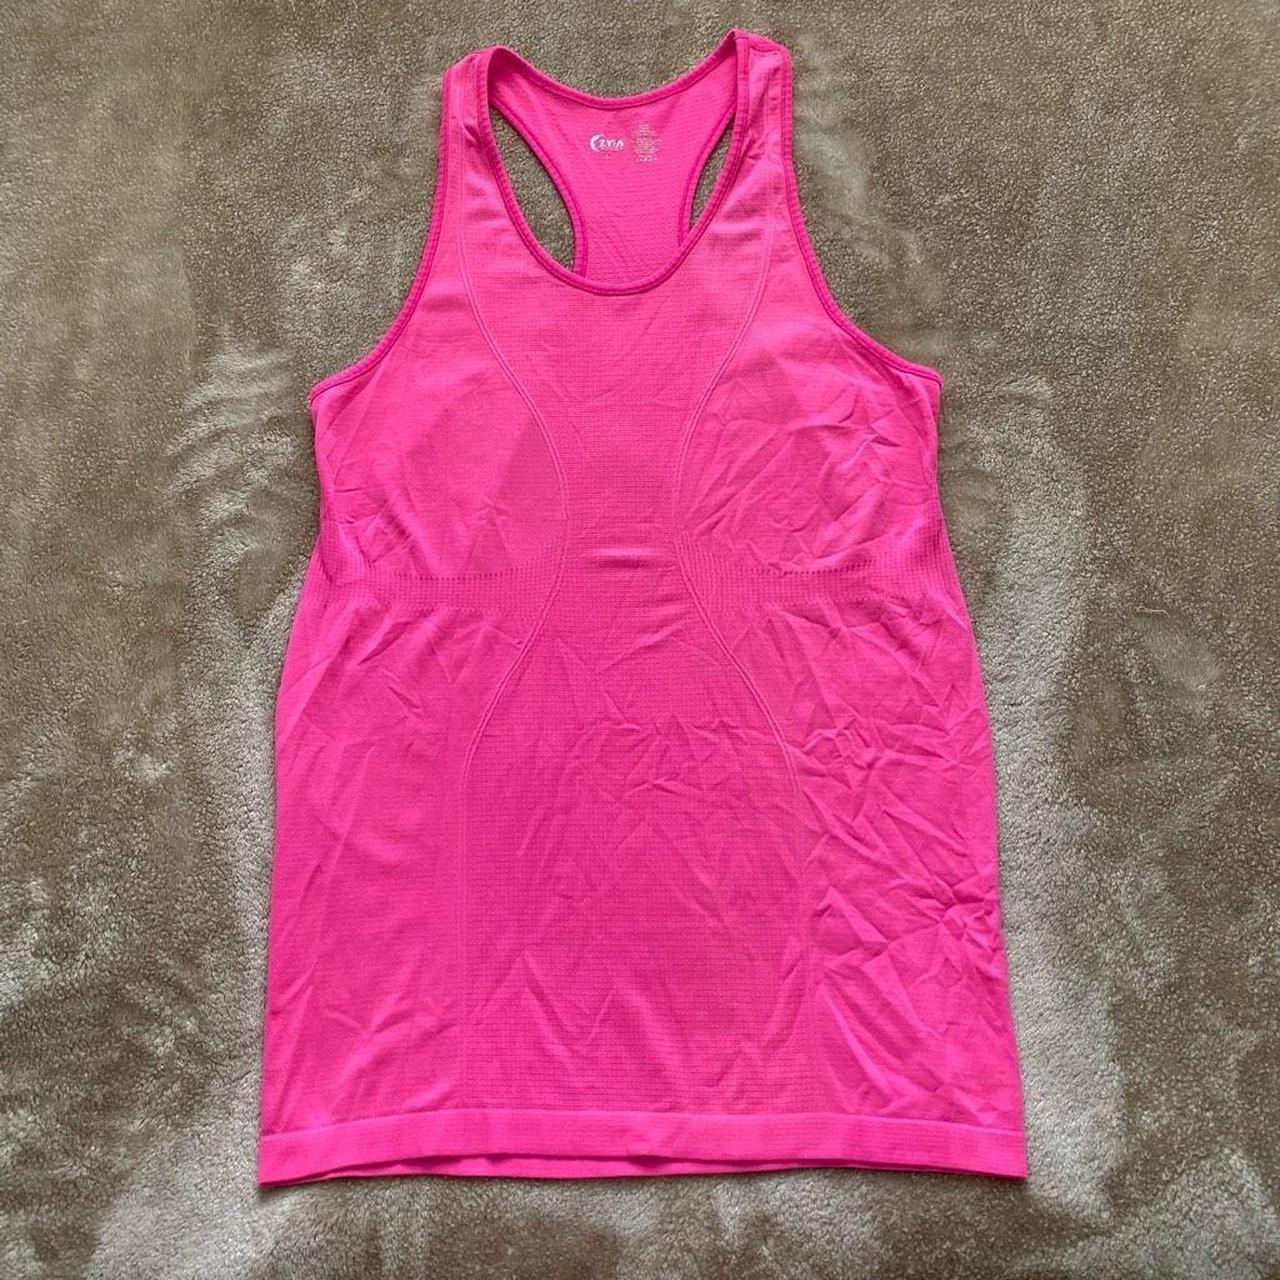 Zyia Active Winter Athletic Tank Tops for Women